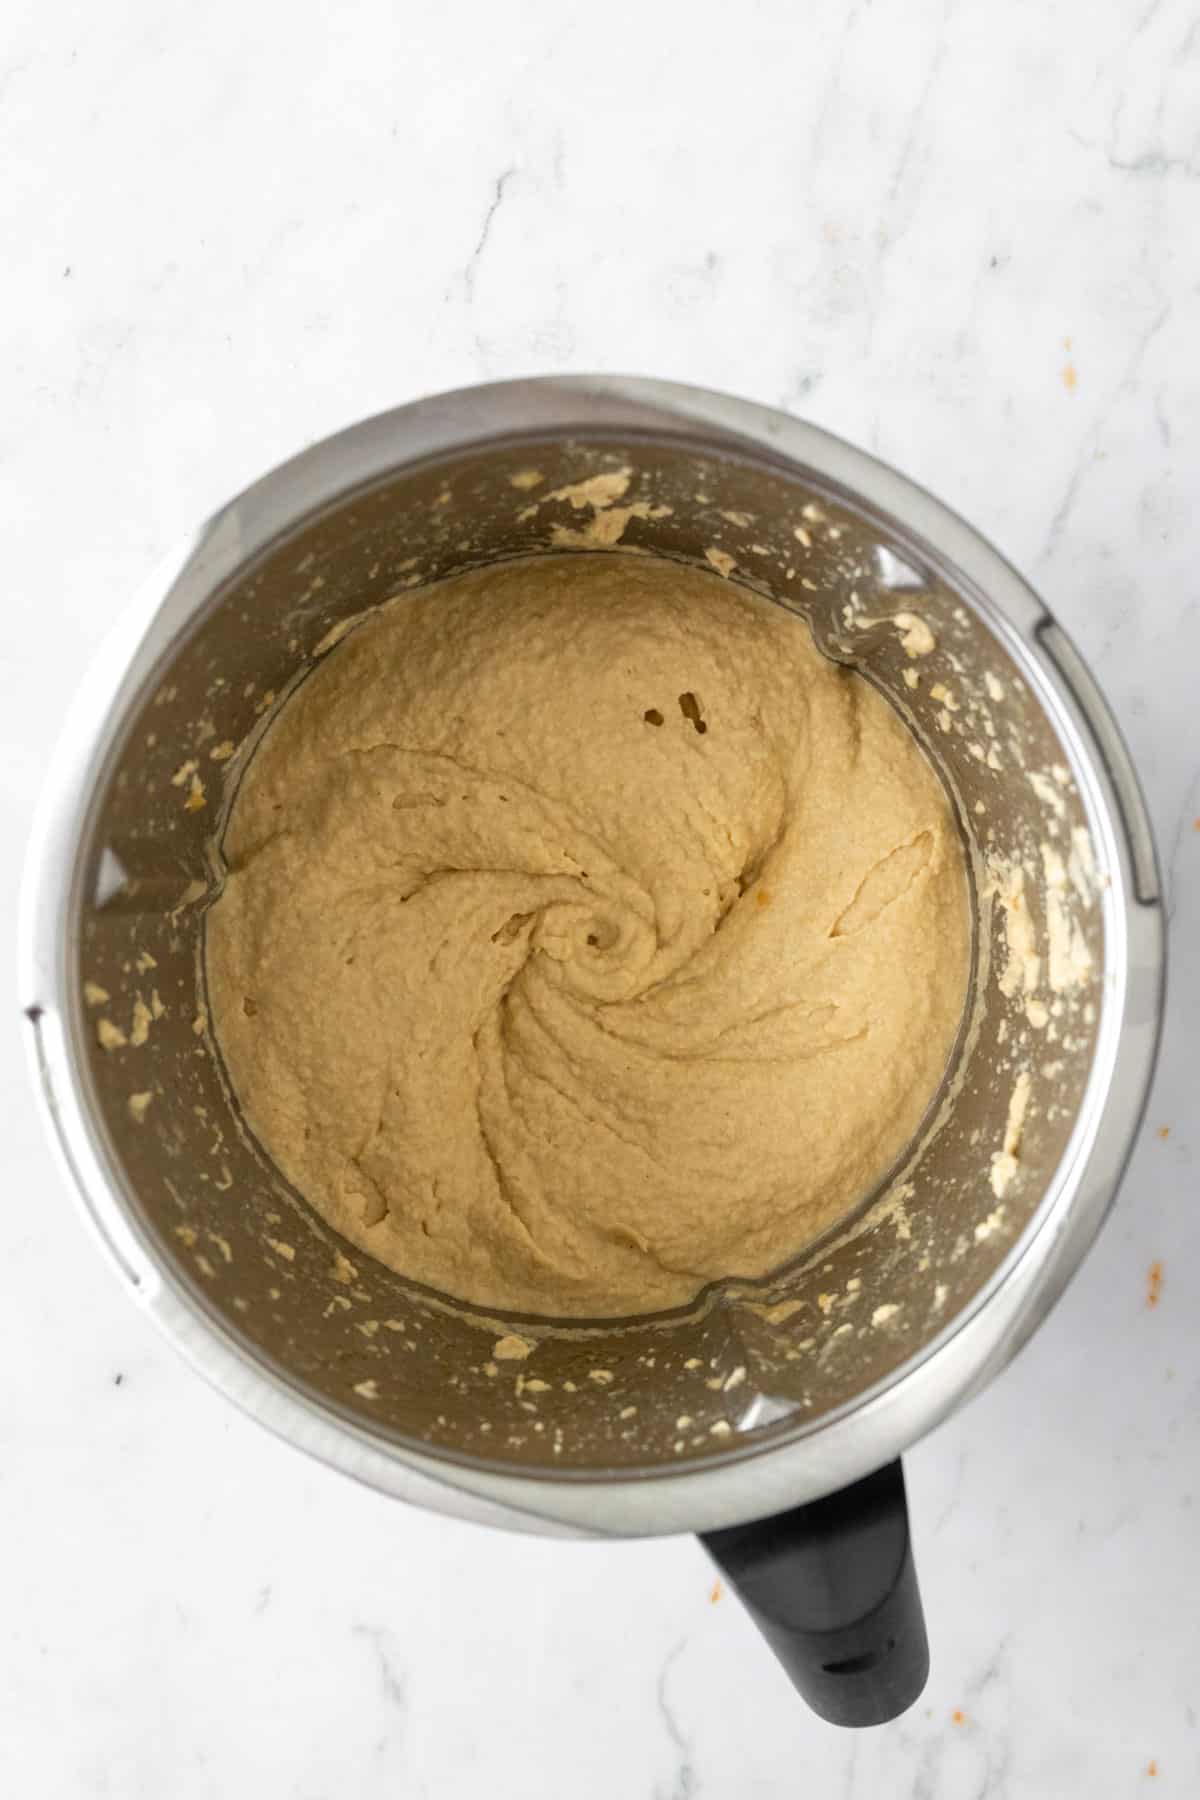 hummus inside the thermomix mixing bowl after being blended